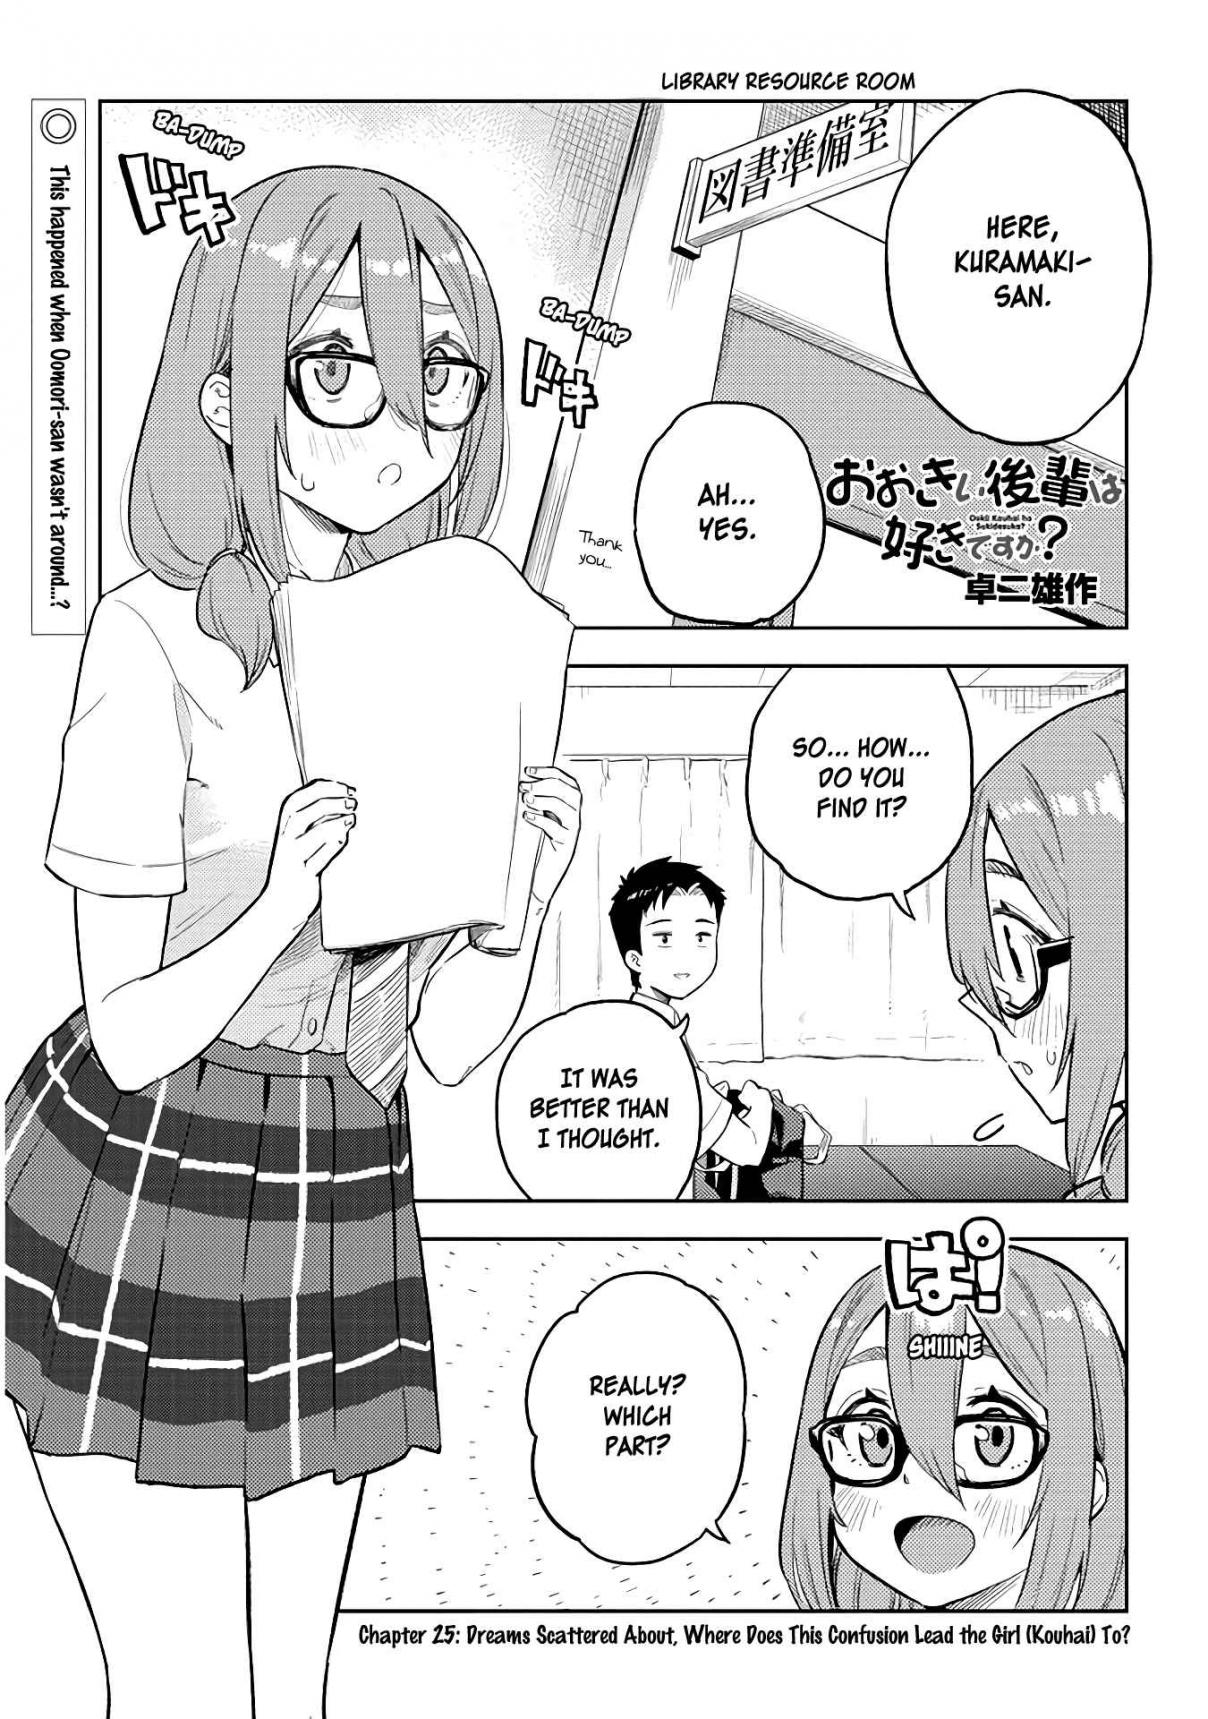 Ookii Kouhai wa Suki Desu ka? Ch. 25 Dreams Scattered About, Where Does This Confusion Lead the Girl (Kouhai) To?